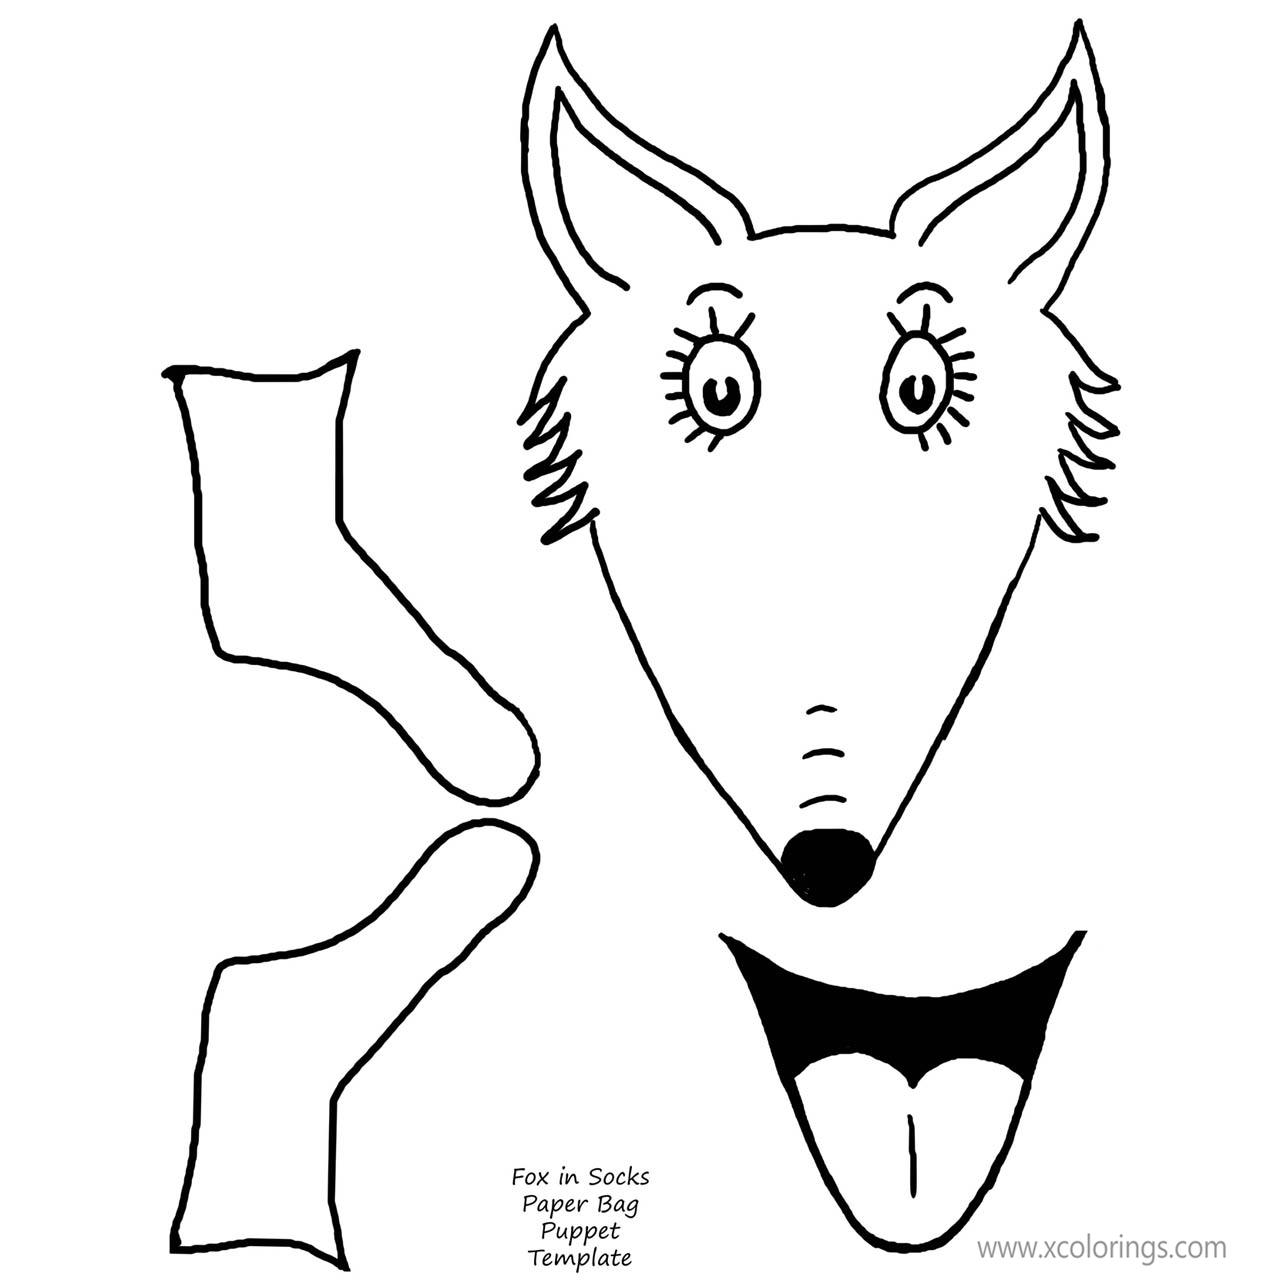 Free Fox in Socks Coloring Pages Craft Template printable